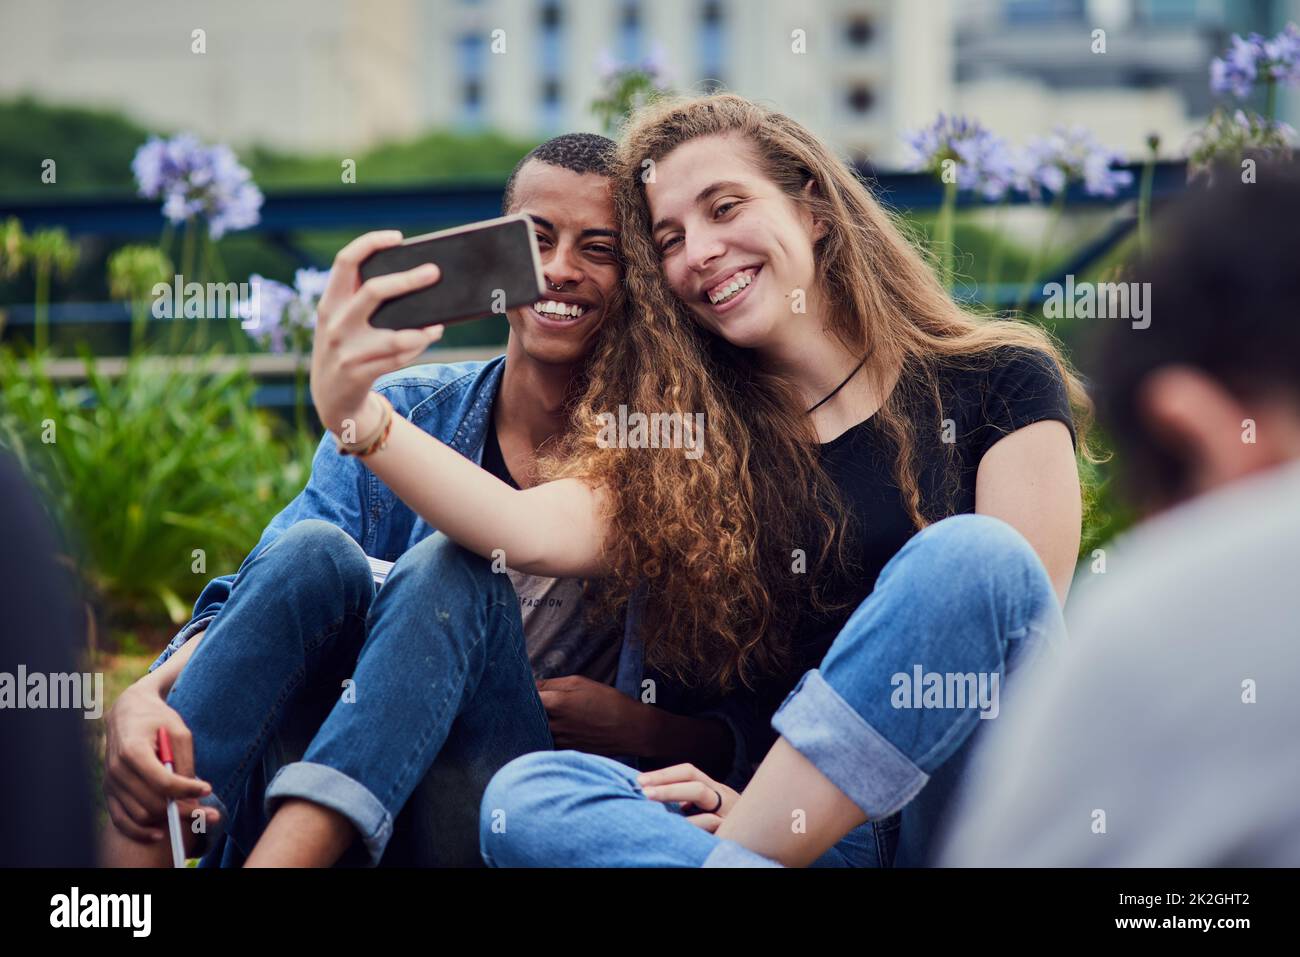 Making memories with my besties. Shot of two young friends taking a self portrait together while being seated in a park outside during the day. Stock Photo